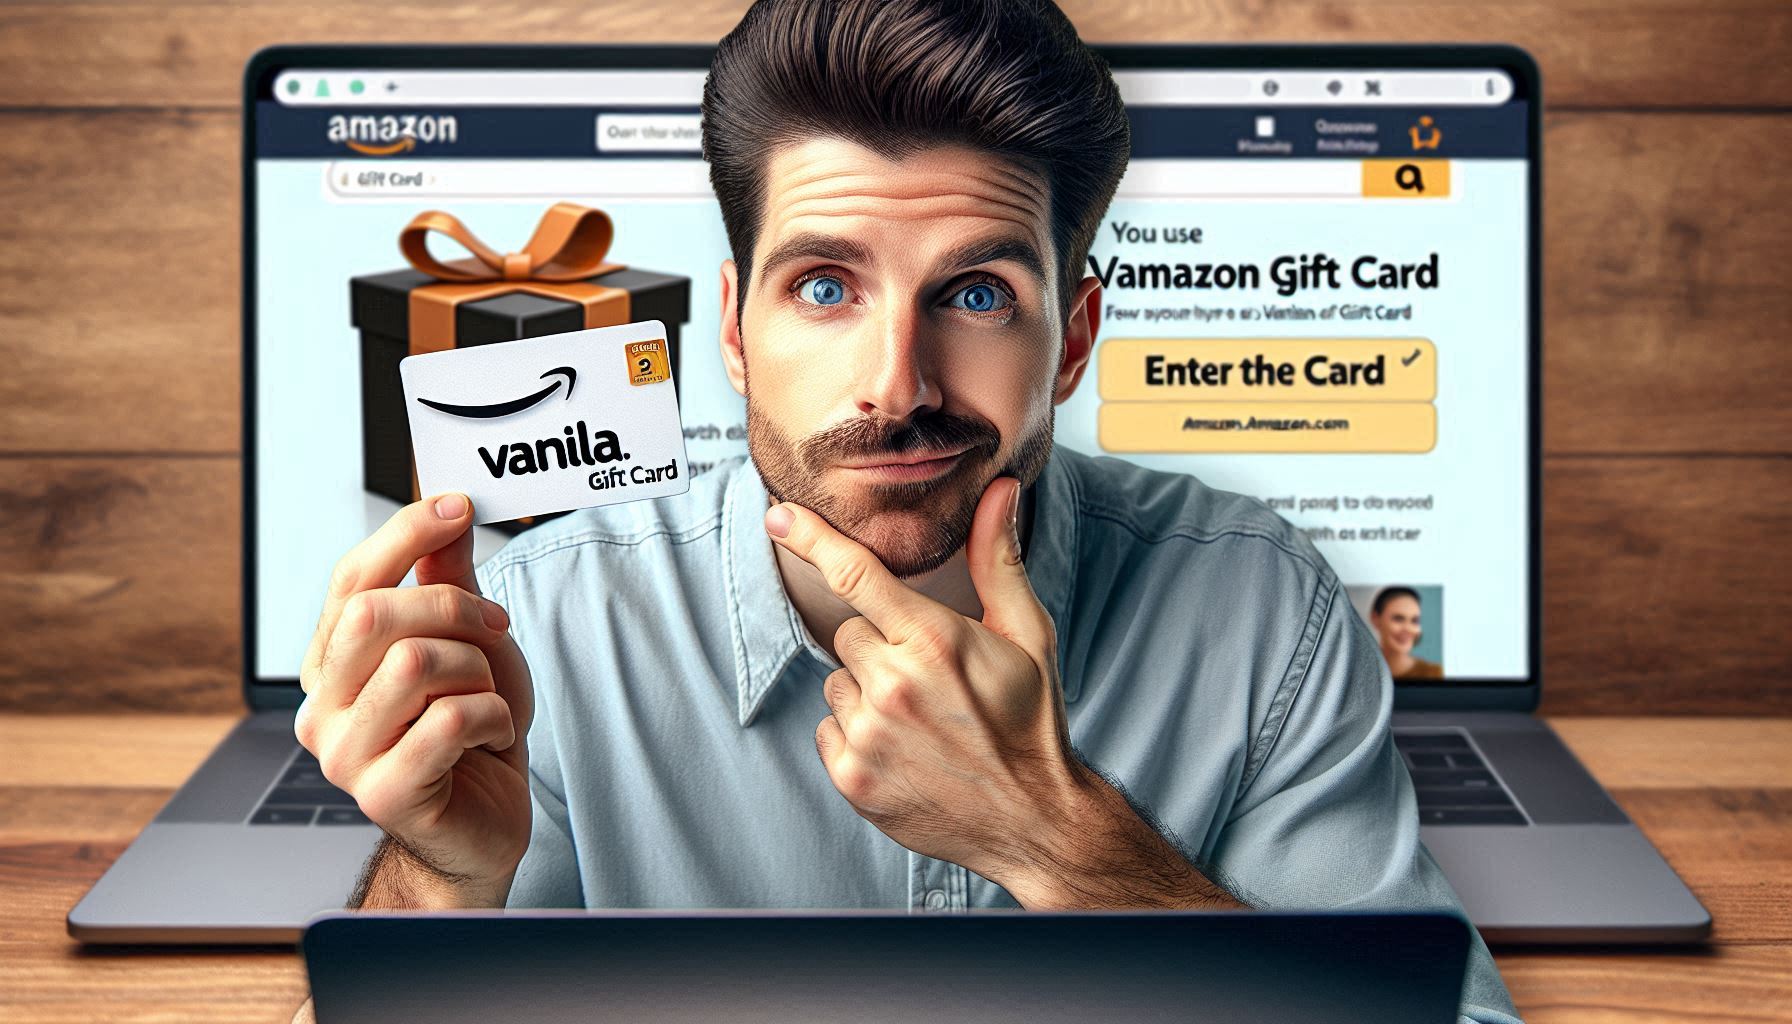 How to Use Vanilla Gift Card on Amazon: Step by Steps